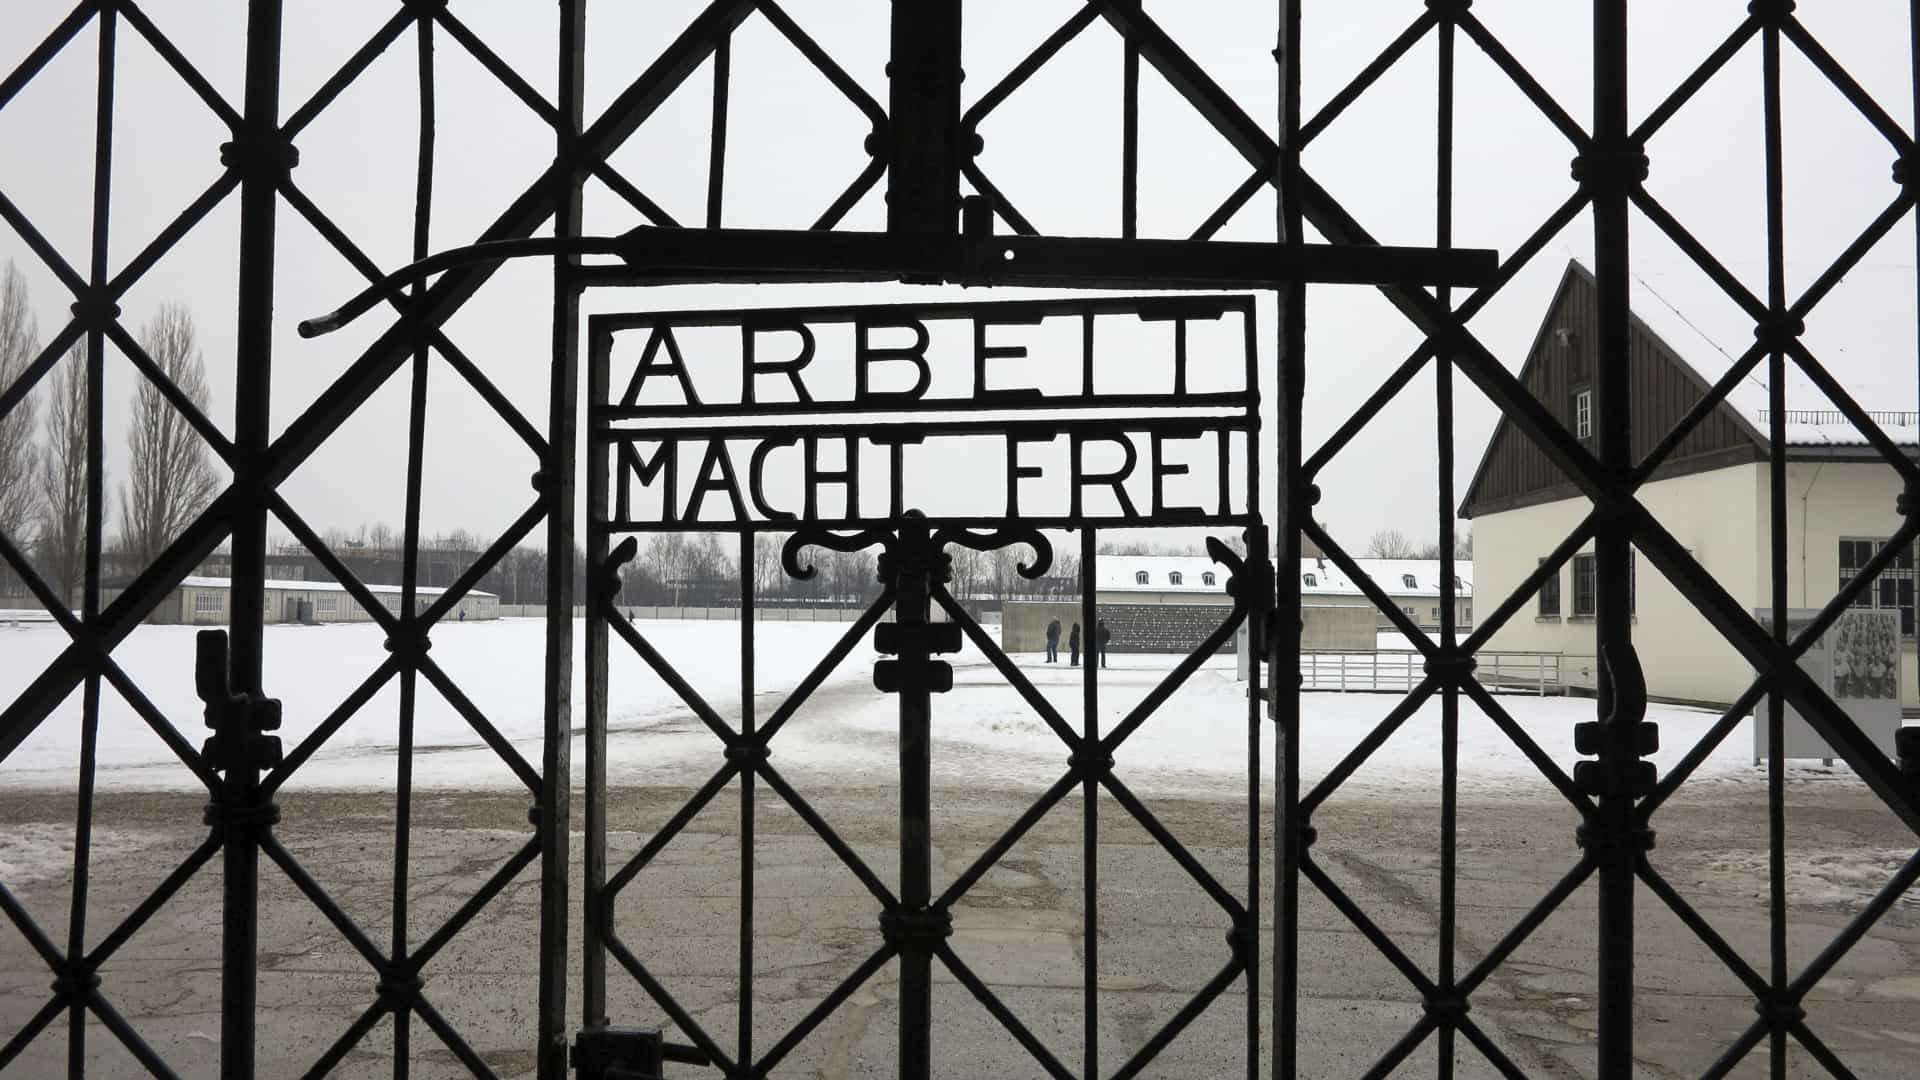 The first concentration camp in Germany was located in Dachau. It was built six years before the war started.<p>You may also like:<a href="https://www.starsinsider.com/n/171247?utm_source=msn.com&utm_medium=display&utm_campaign=referral_description&utm_content=127835v1en-us"> Exotic British destinations you must visit!</a></p>